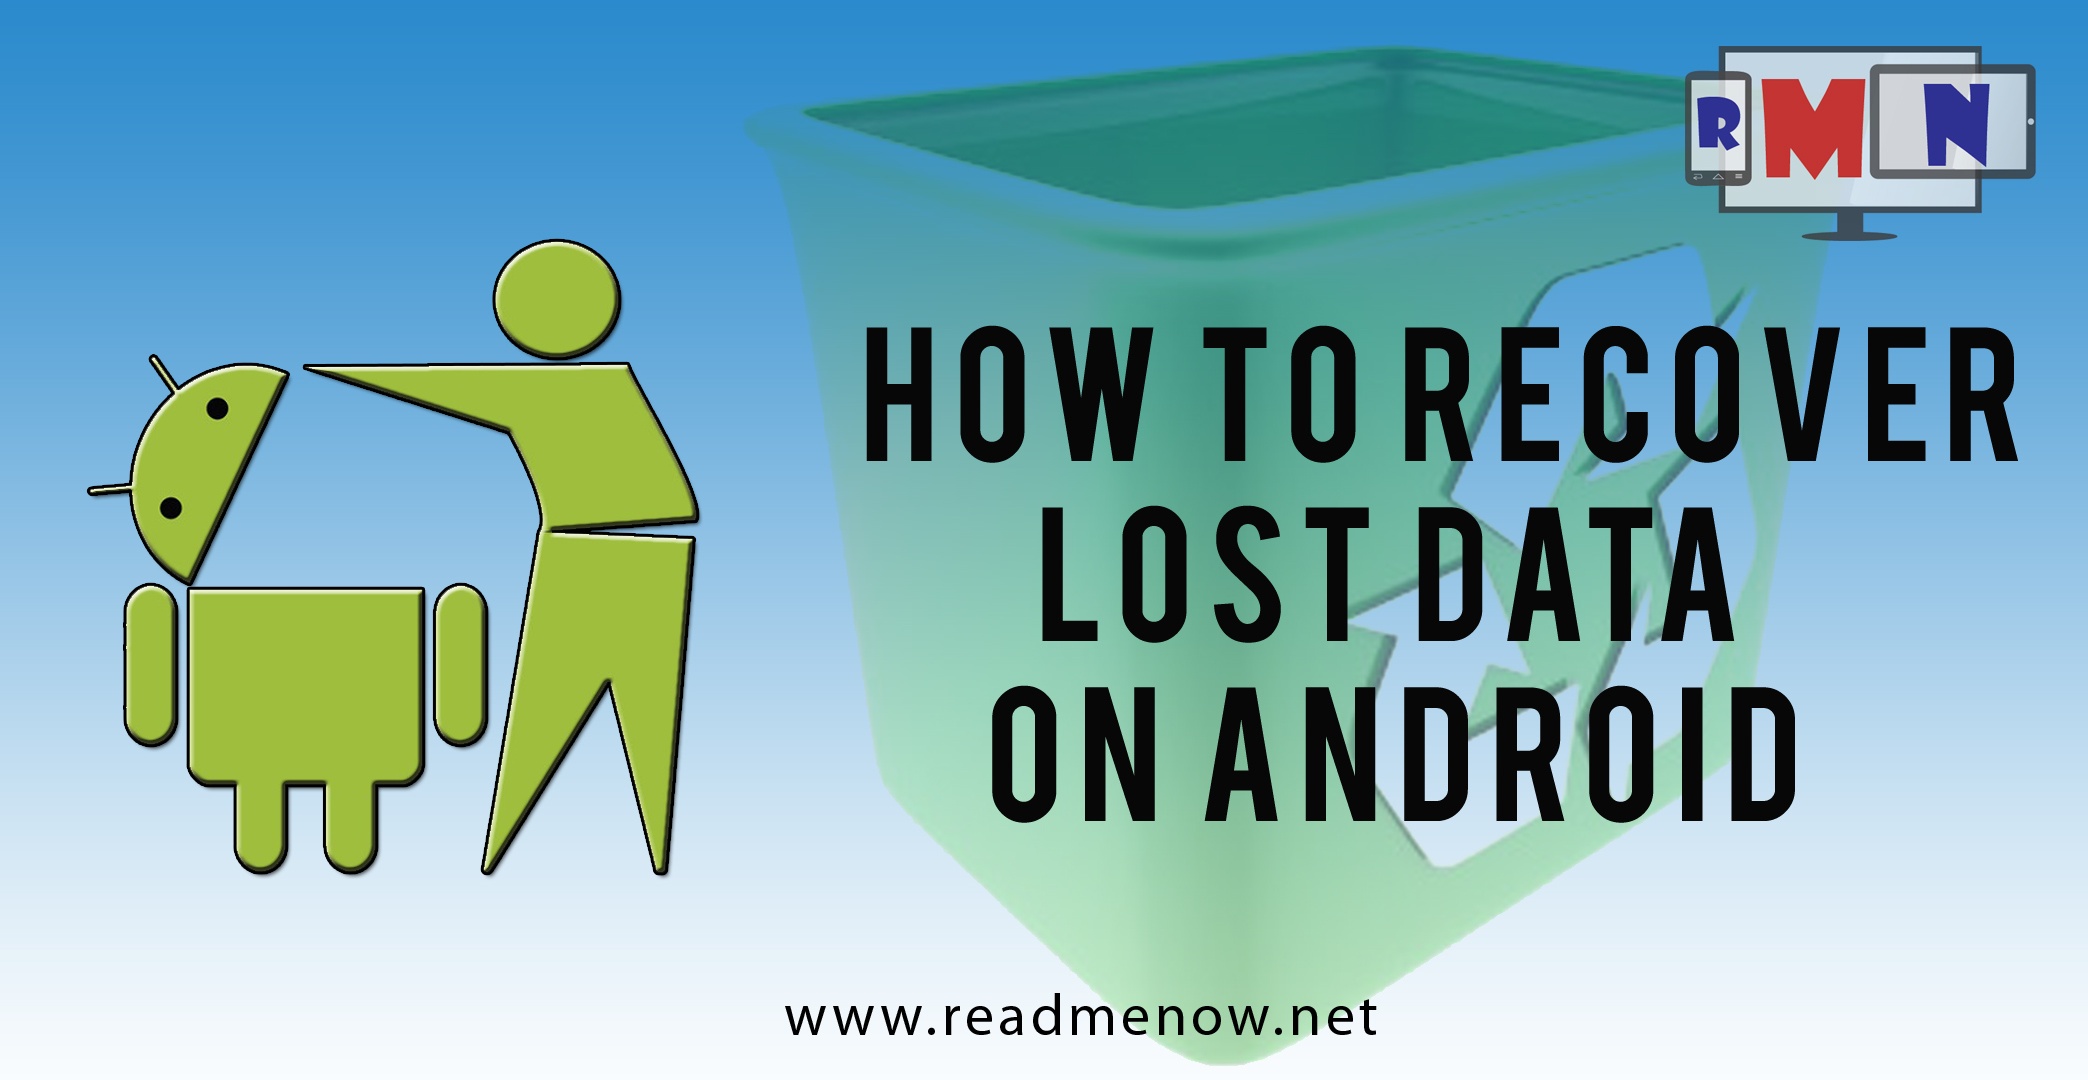 How To Recover Lost Data On Android.